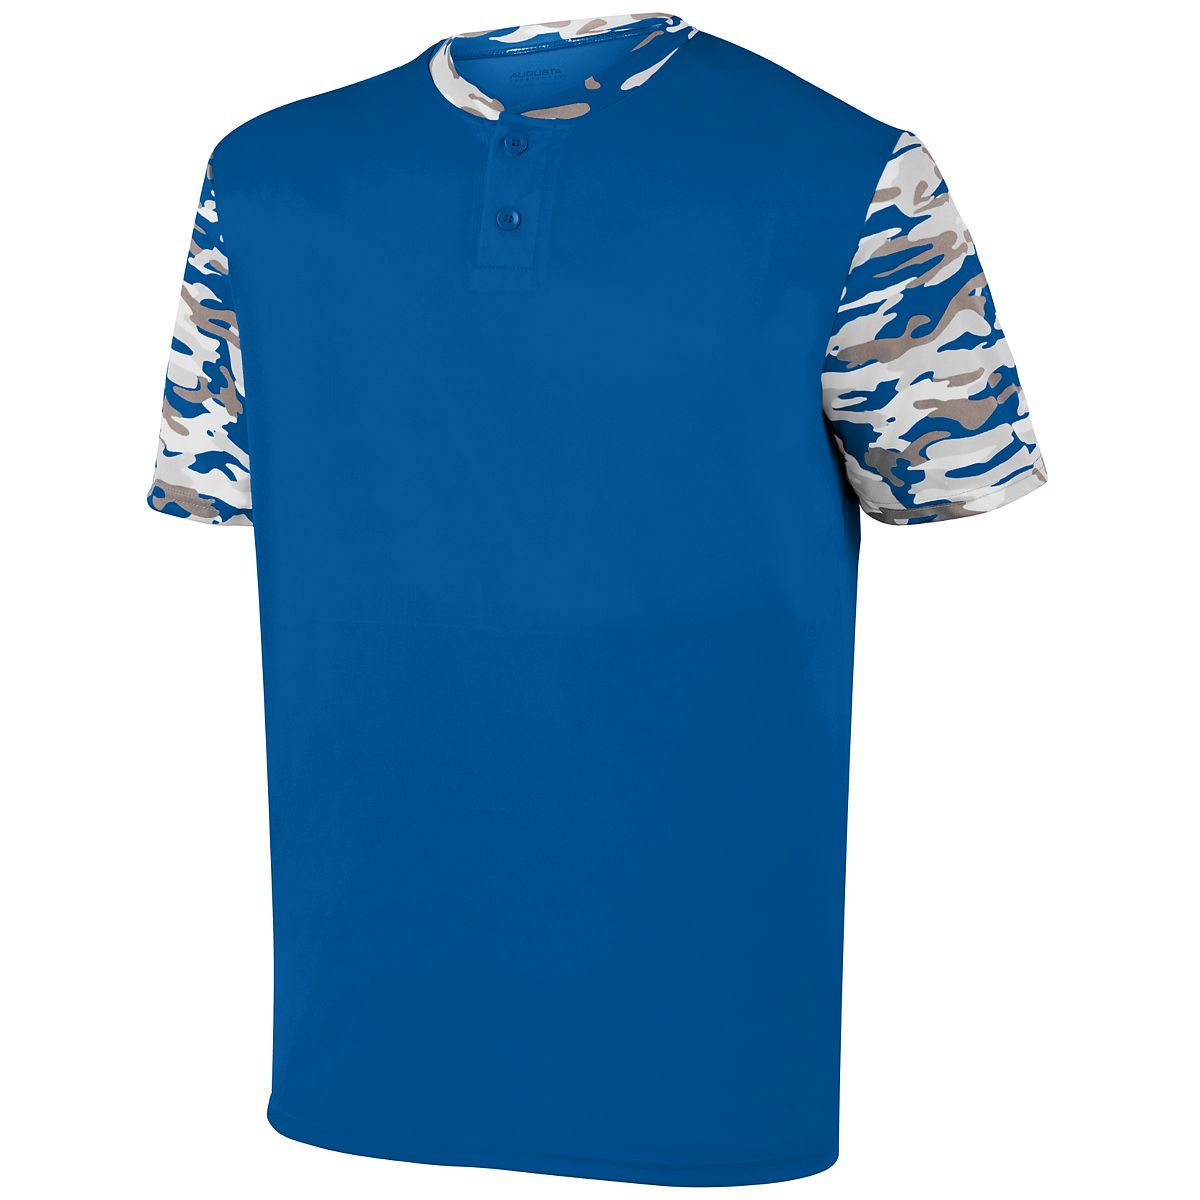 Augusta Sportswear Youth Pop Fly Jersey in Royal/Royal Mod  -Part of the Youth, Youth-Jersey, Augusta-Products, Baseball, Shirts, All-Sports, All-Sports-1 product lines at KanaleyCreations.com